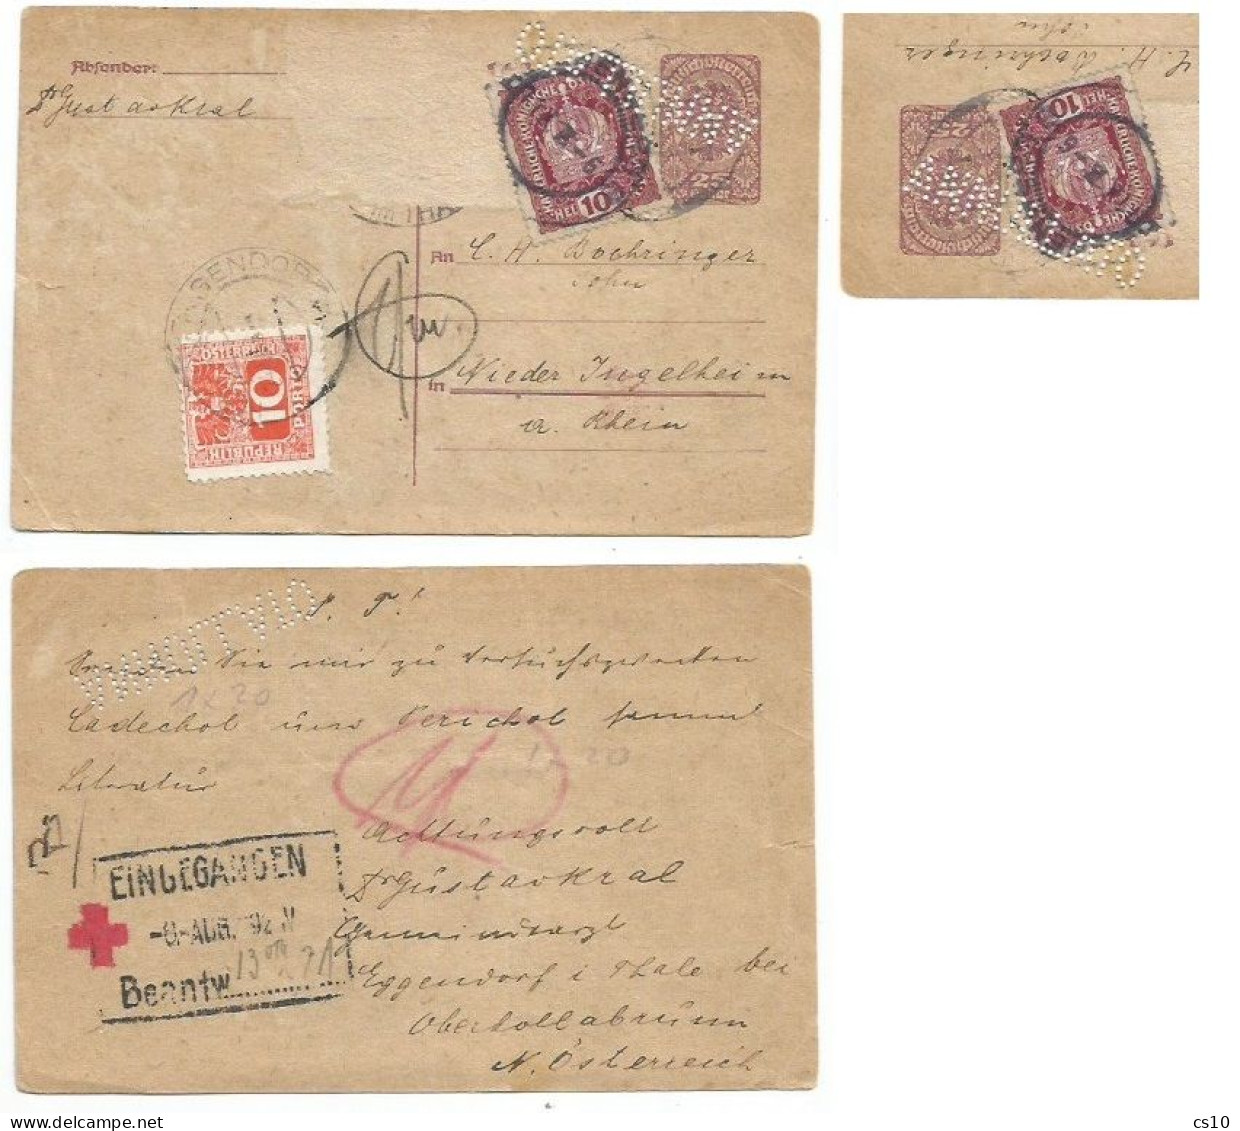 Austria PSC H.25 + H.10 Sent 1oct1918 (1 Stamp Missed) Taxed P.Due H.10 With Perforation "ANNULLATO" .....???? - Lettres & Documents